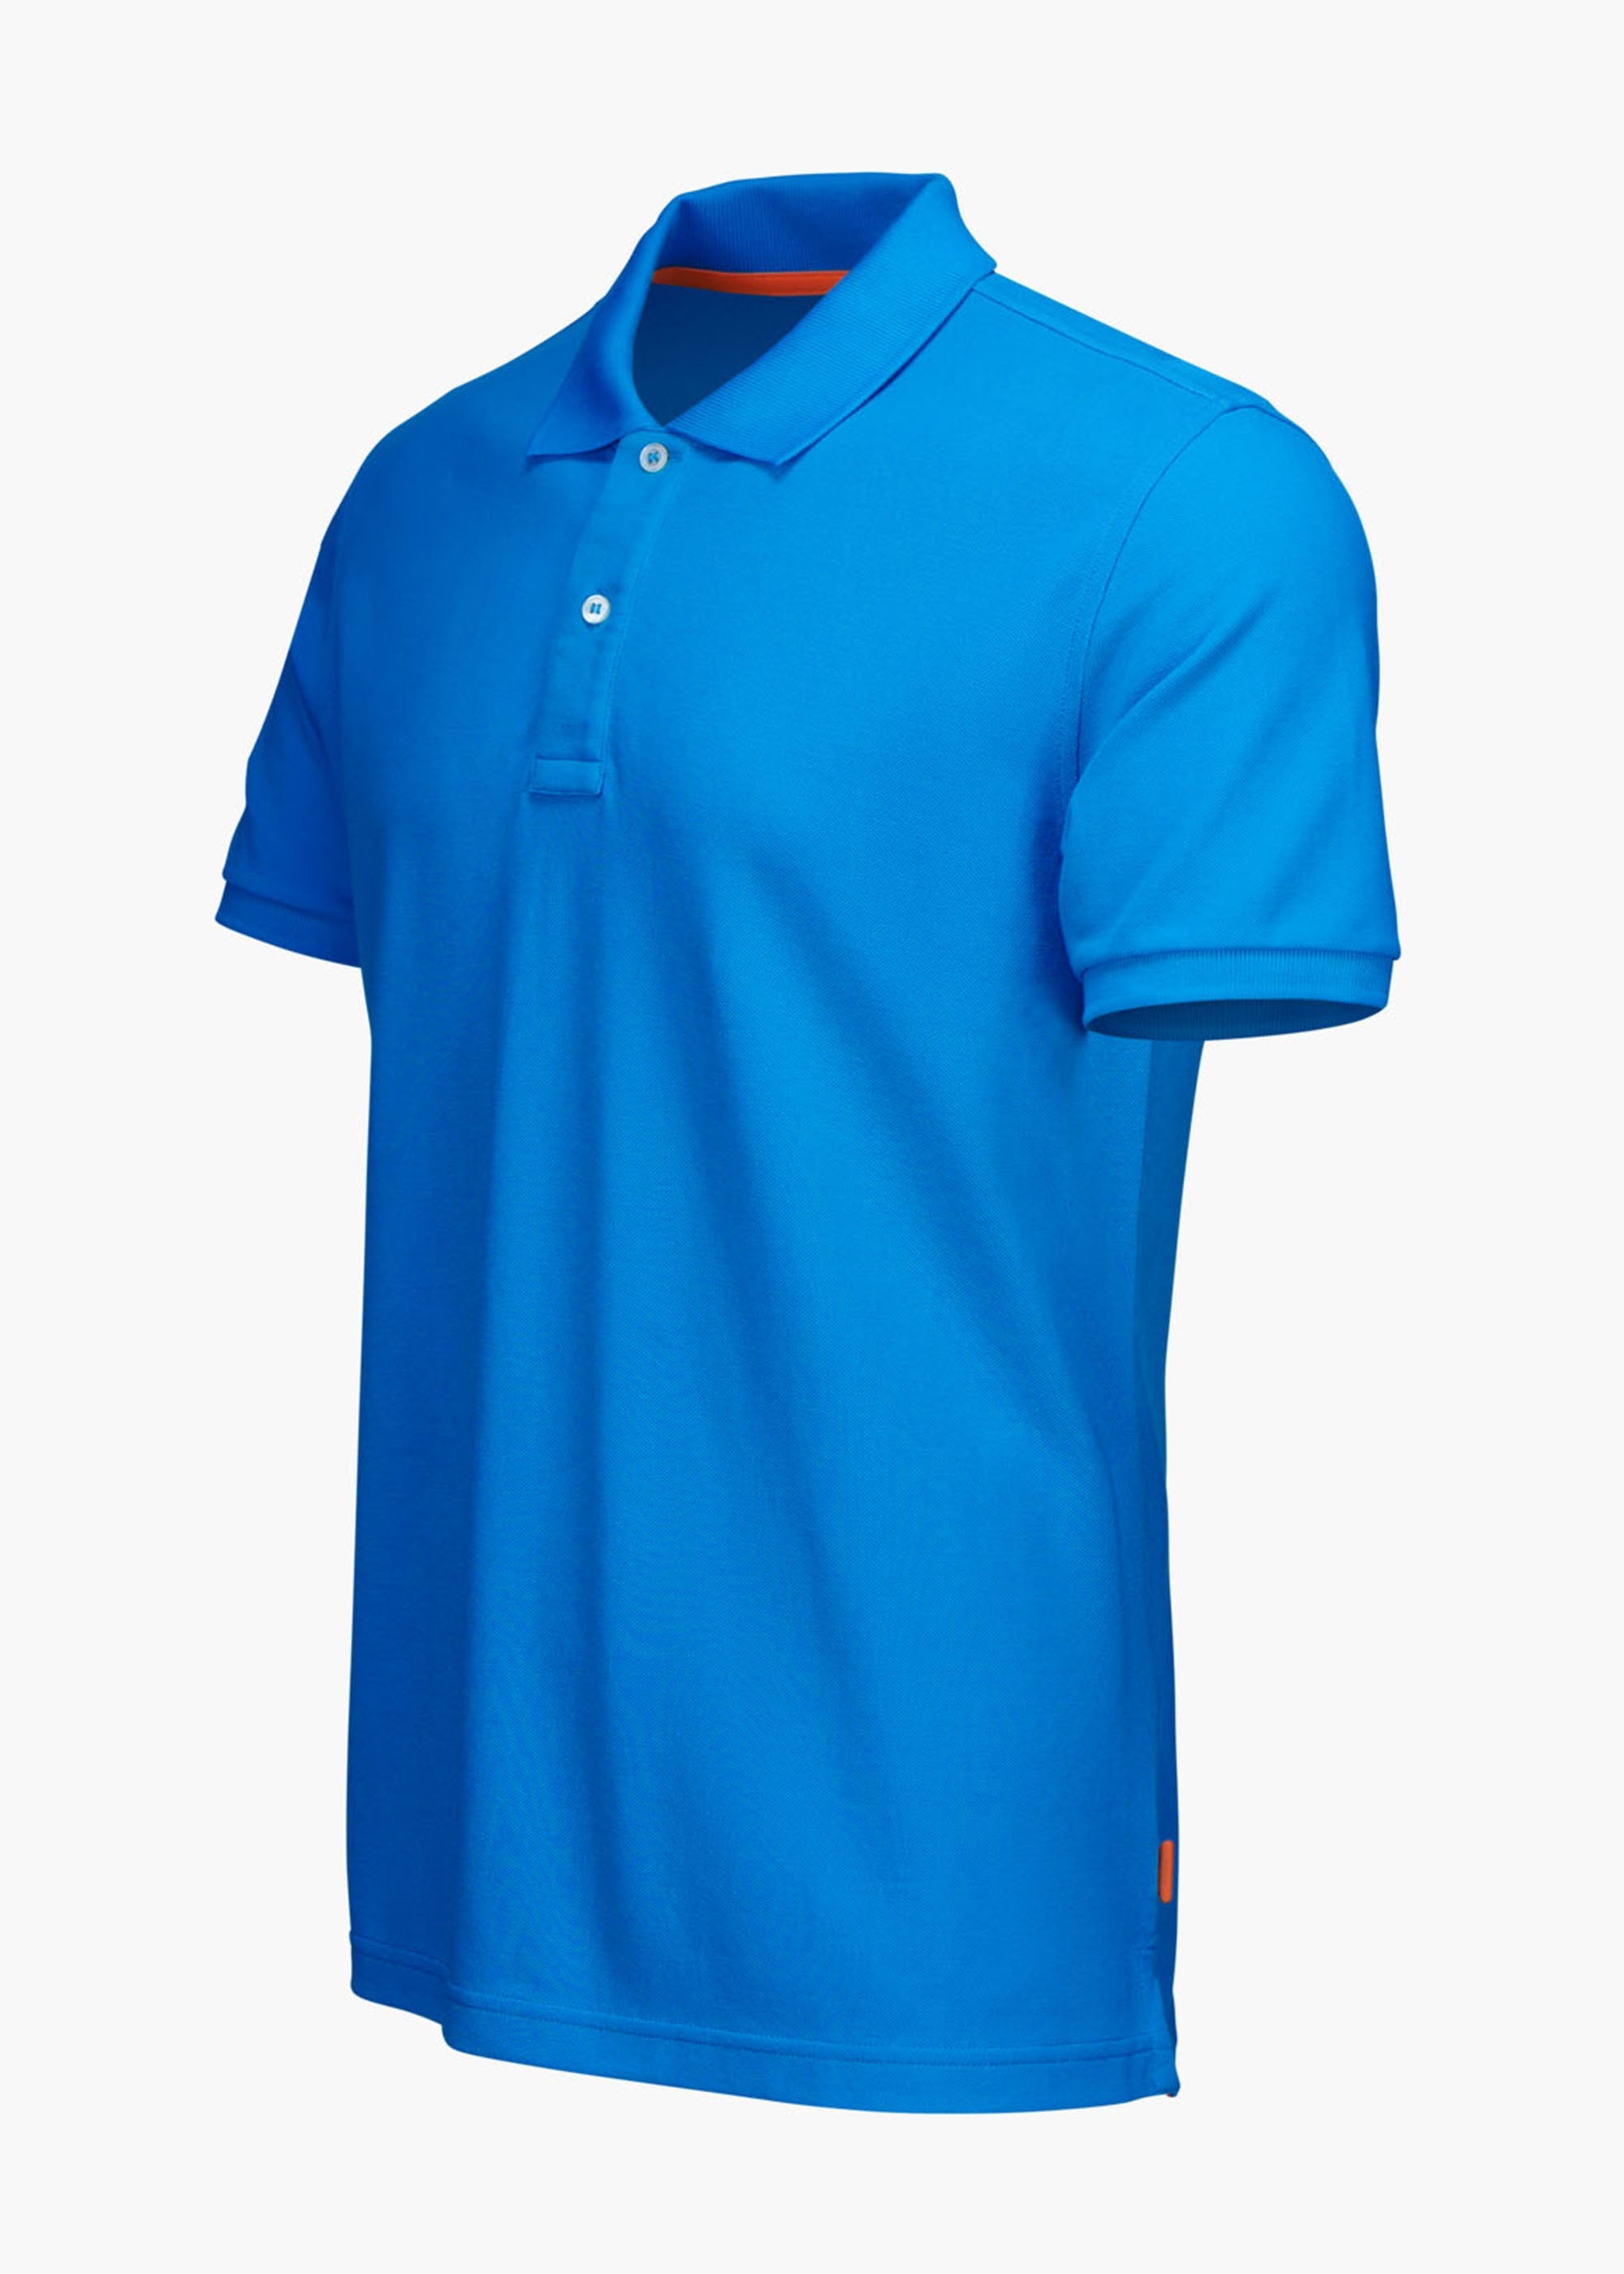 | SWIMS for Mens Sunnmore in Polo SWIMS Blue | Sail